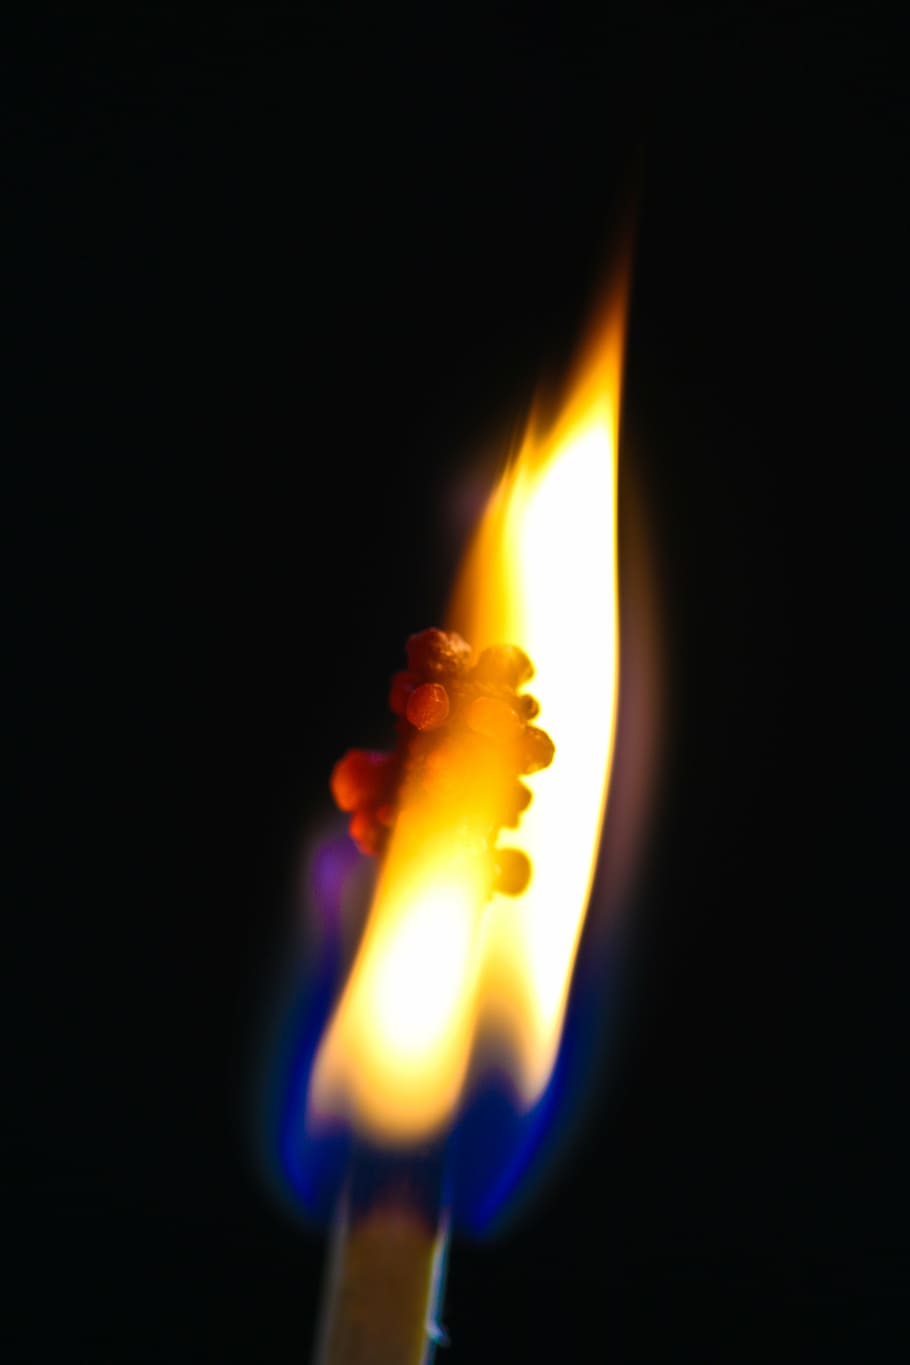 fire, candle, flame, candles, burn, flames, burning, fire - Natural Phenomenon, heat - Temperature, match